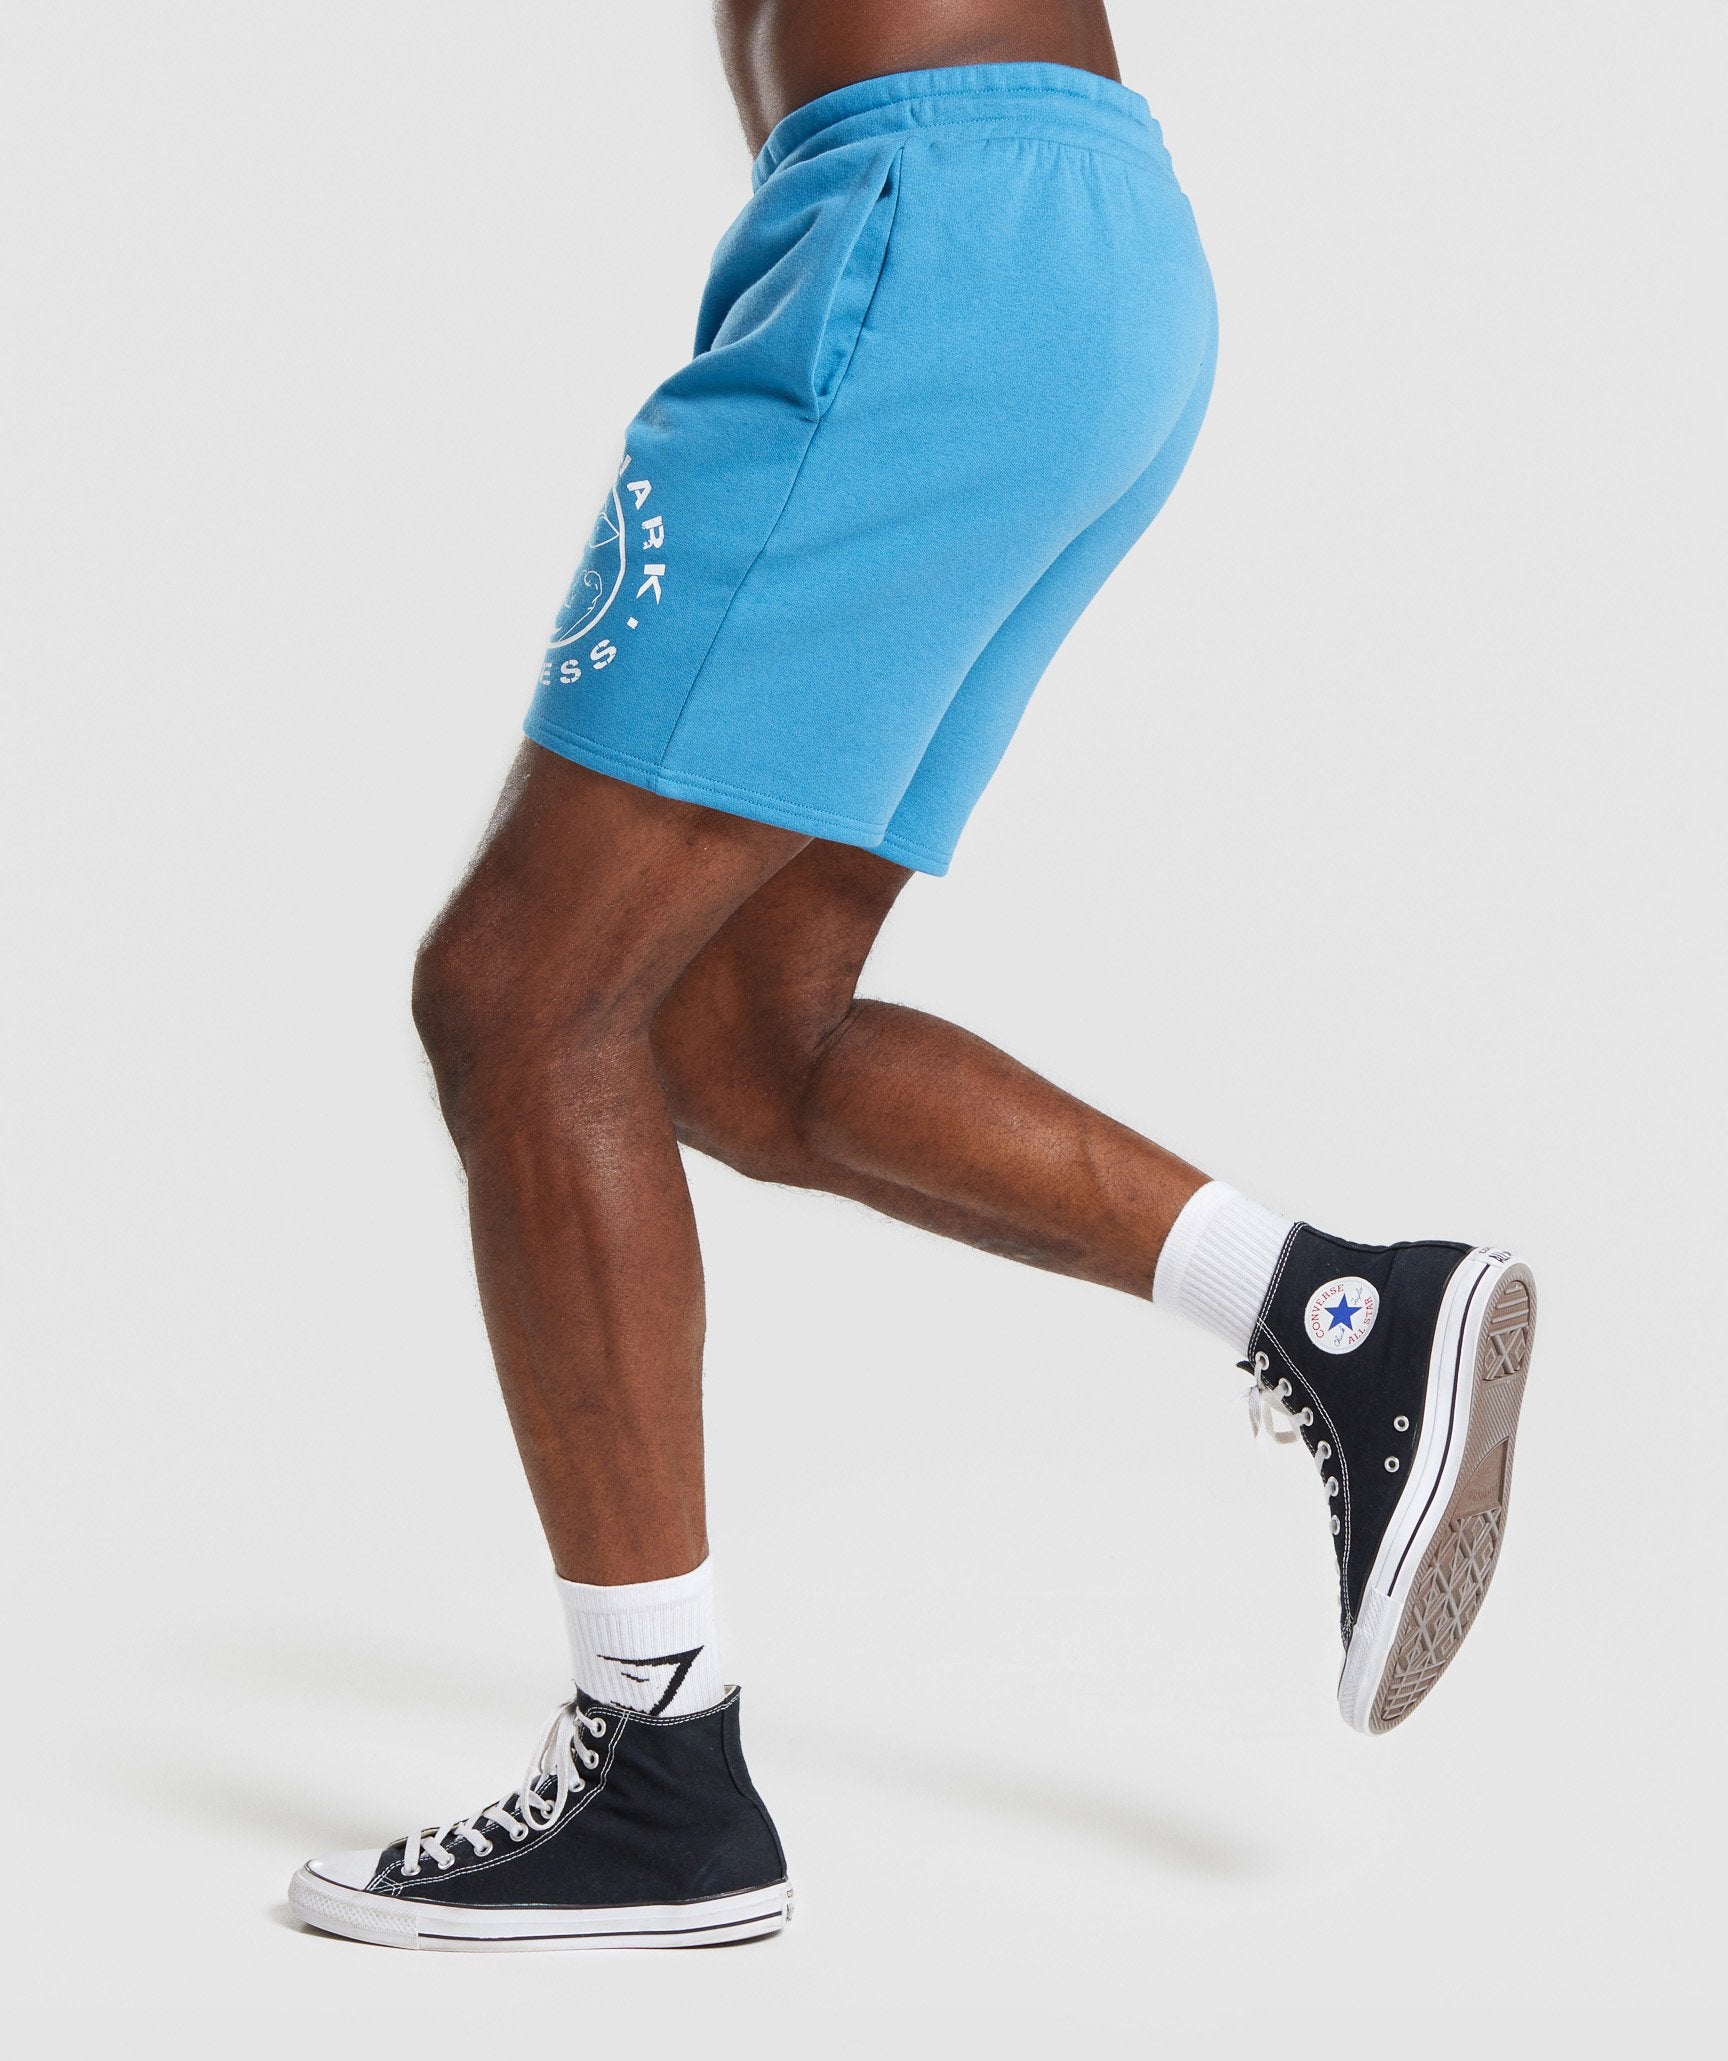 Legacy Shorts in Blue - view 4